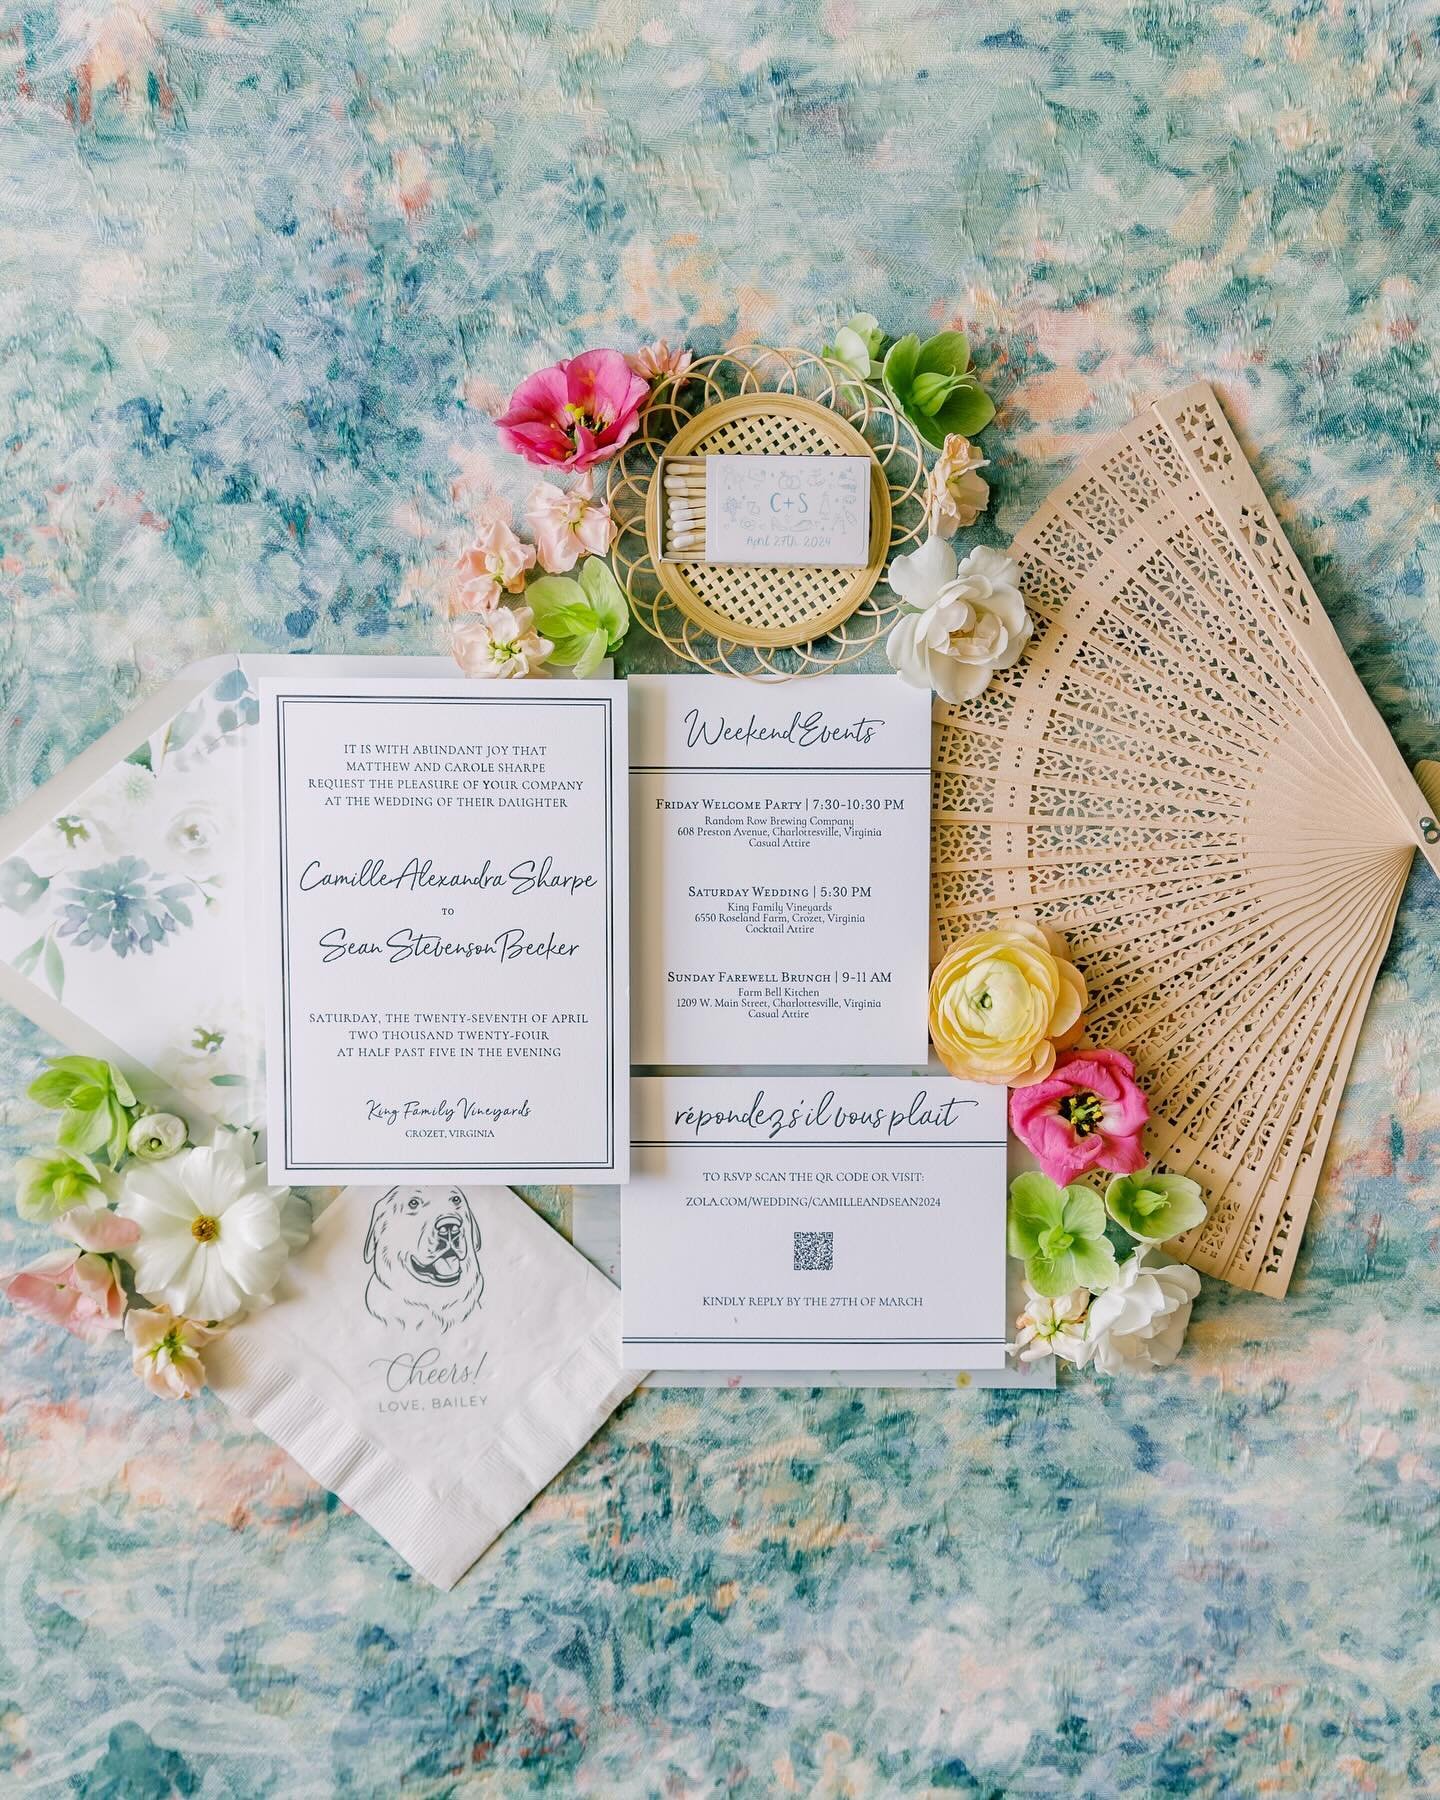 I&rsquo;m SO excited that this is the year of COLOR! I love all the gorgeous designs my brides have chosen so far and I&rsquo;ve had so much fun curating their flat lays. Don&rsquo;t get me wrong, I love a classic style, but adding in pops of color i